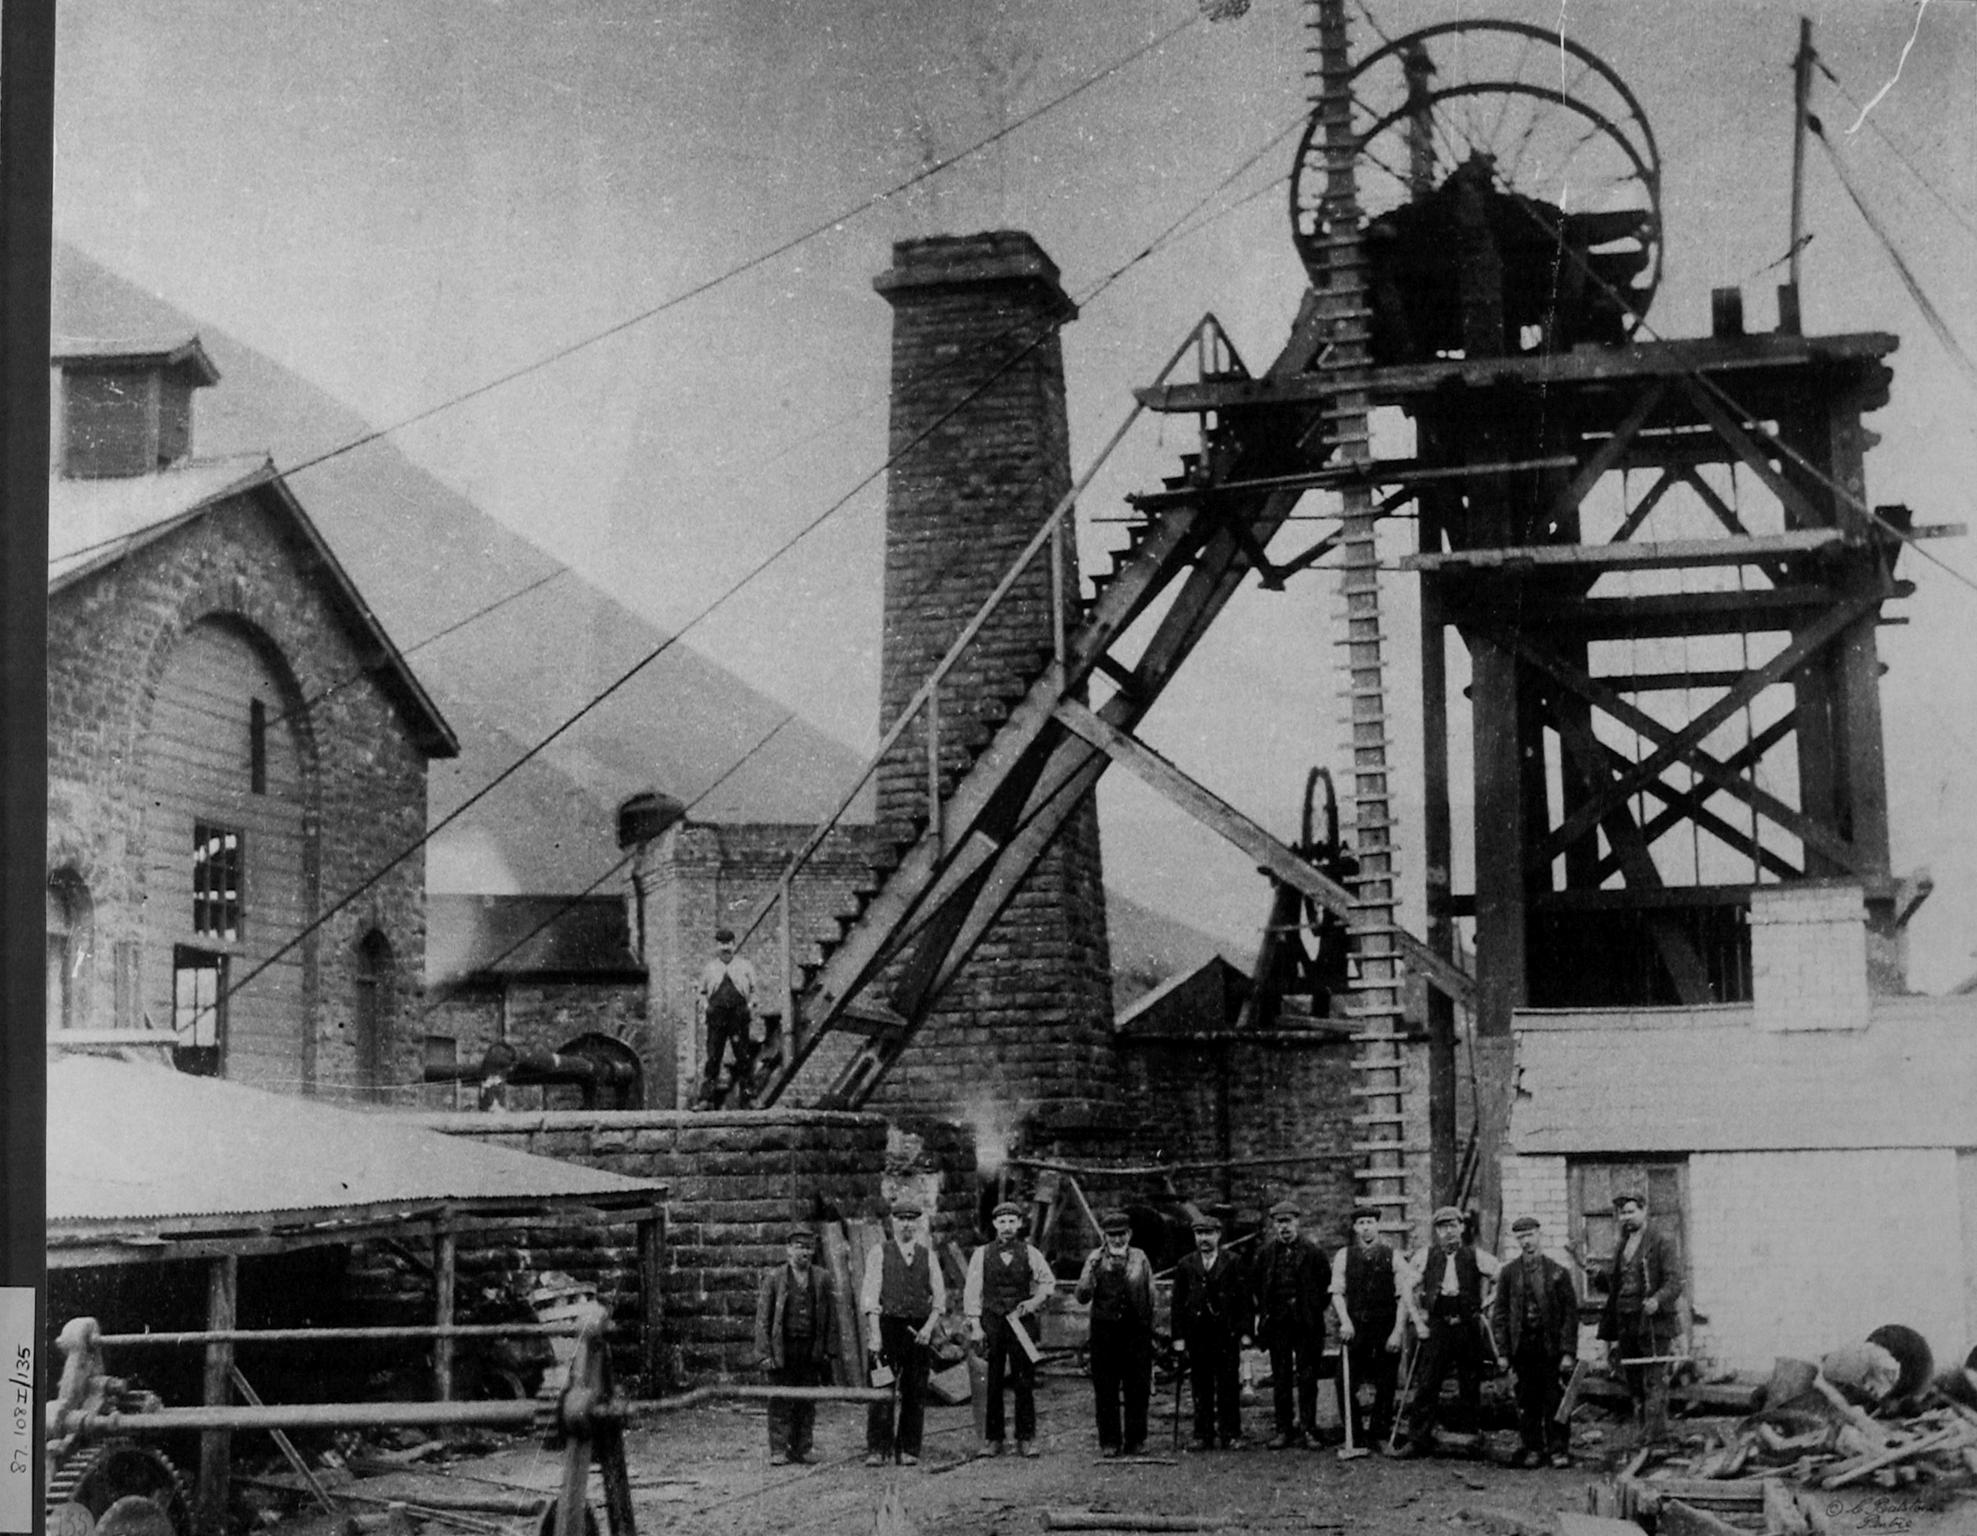 Bute Colliery, photograph